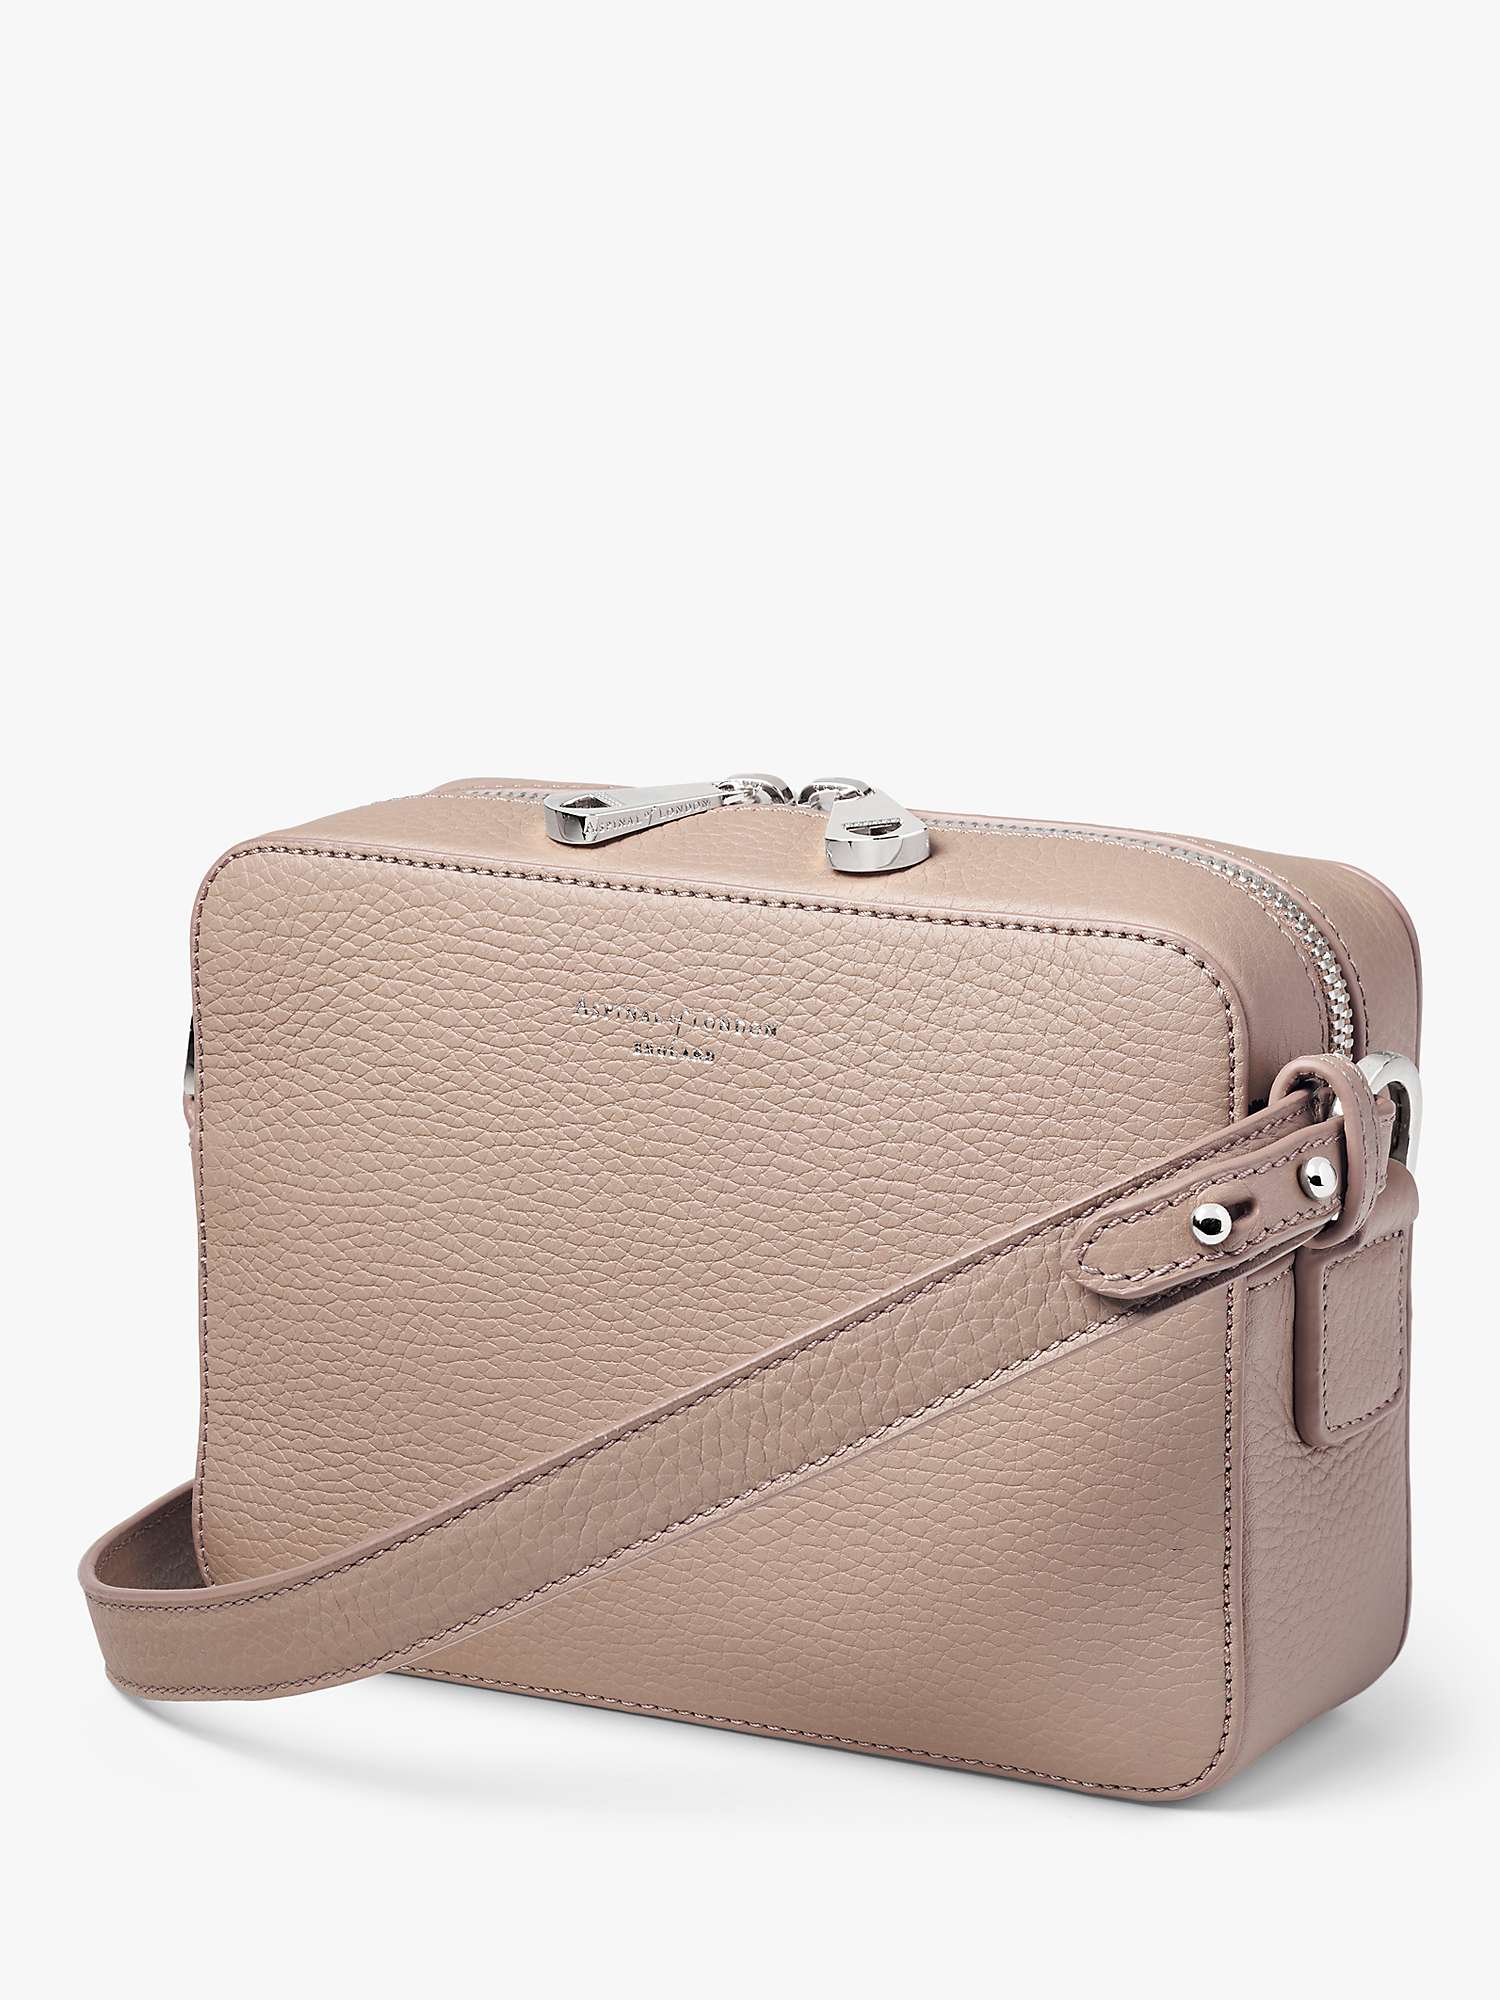 Buy Aspinal of London Leather Camera Bag, Soft Taupe Online at johnlewis.com